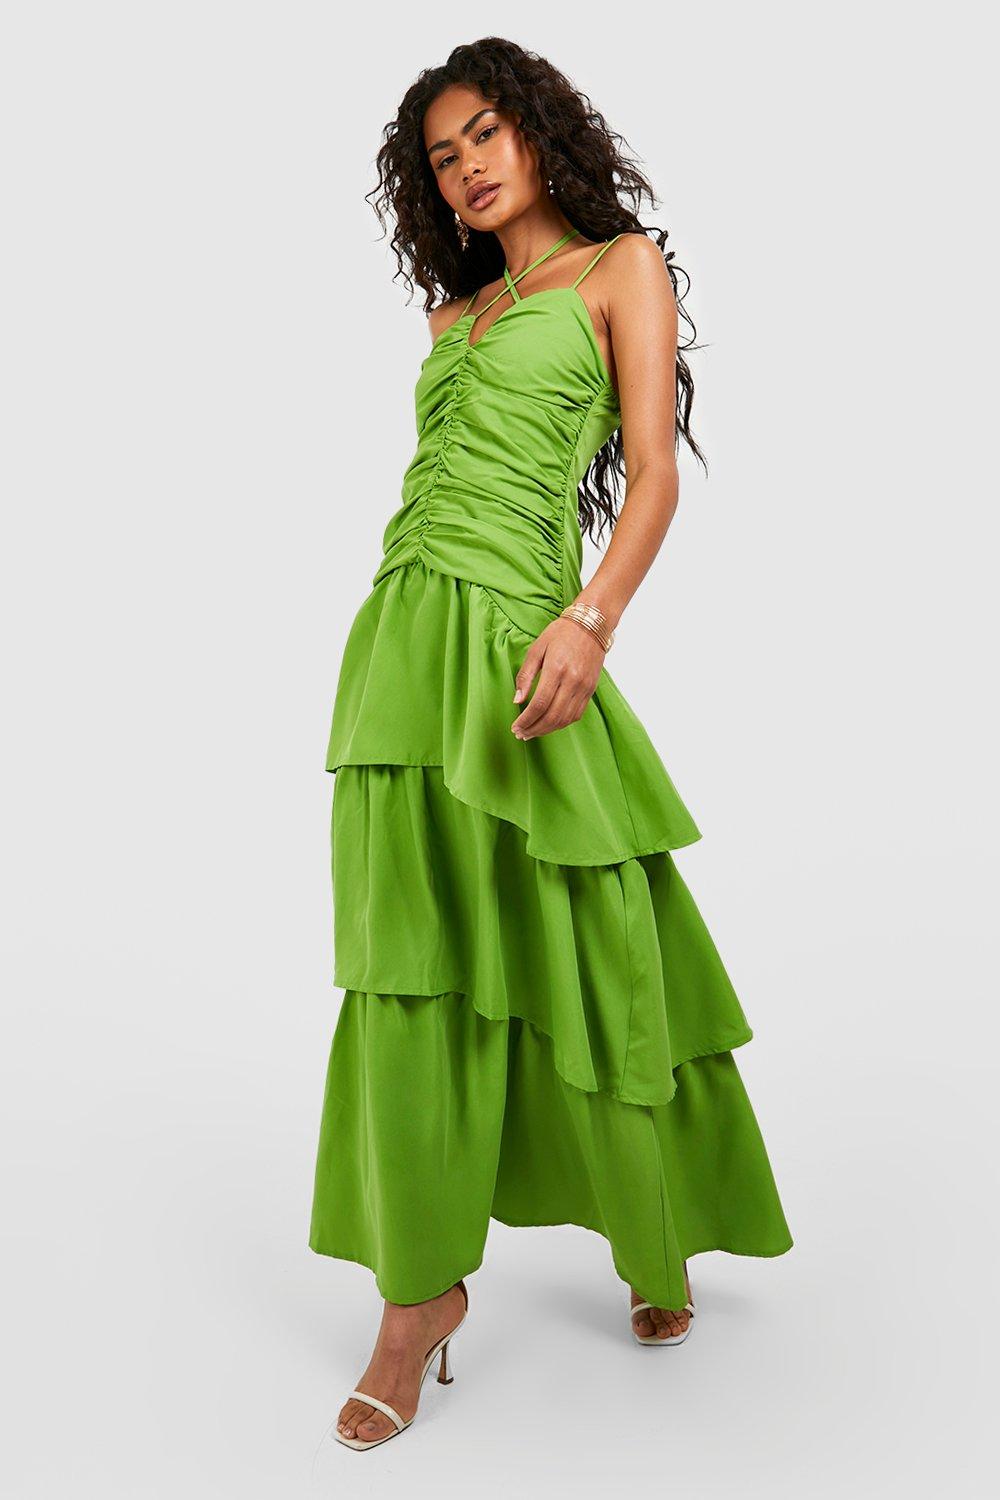 Ruched Bodice Frill Skirt Maxi Dress